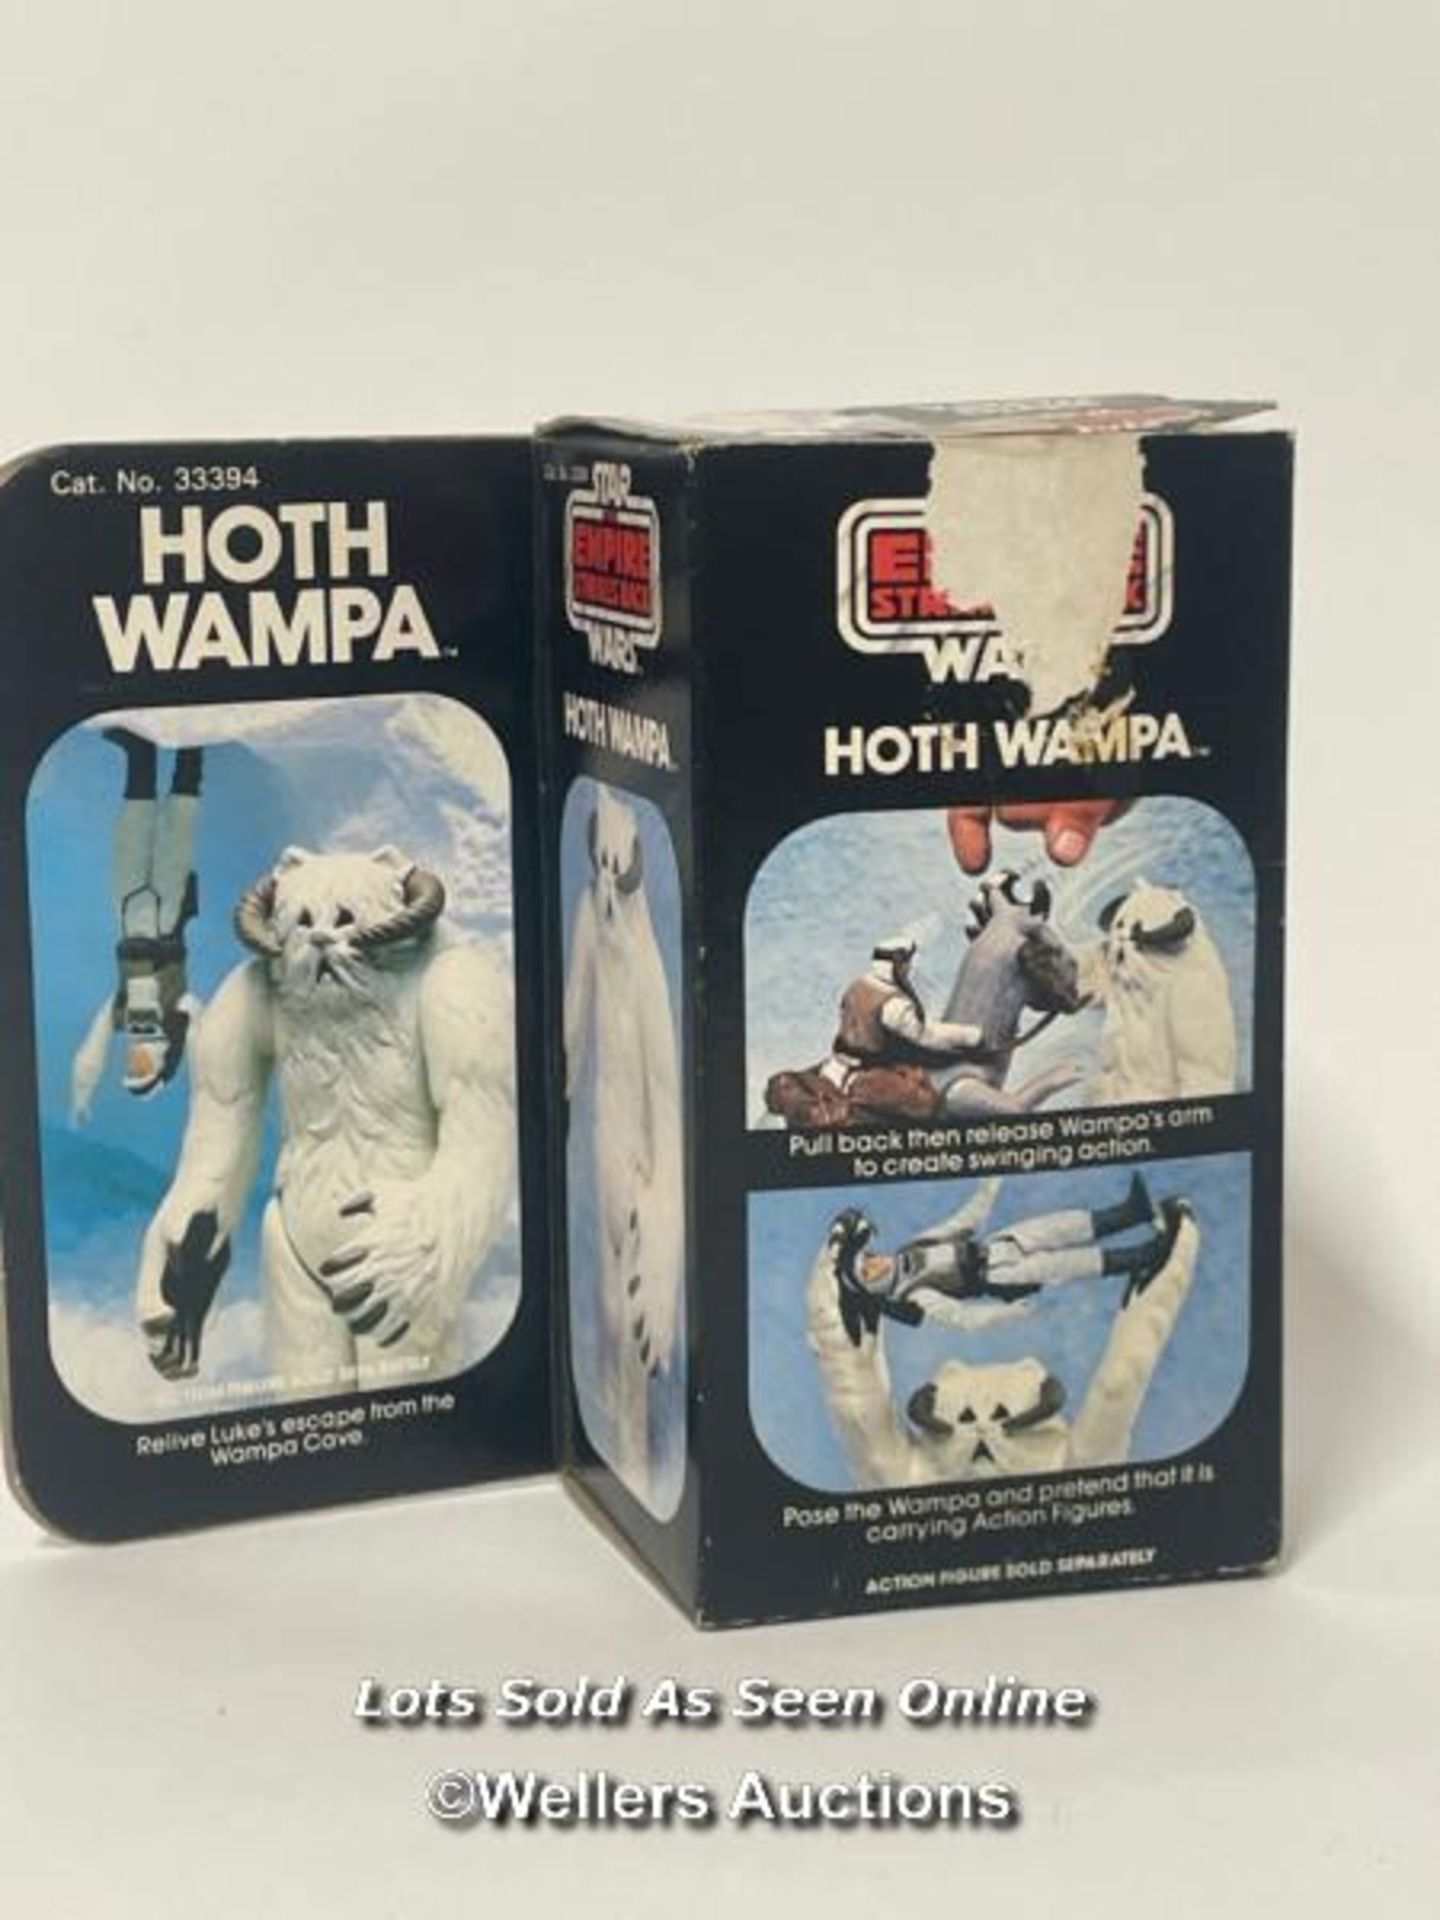 Vintage Star Wars the Battle of Hoth lot, including Palitoy Wampa creature, Kenner Radar Laser - Image 4 of 14